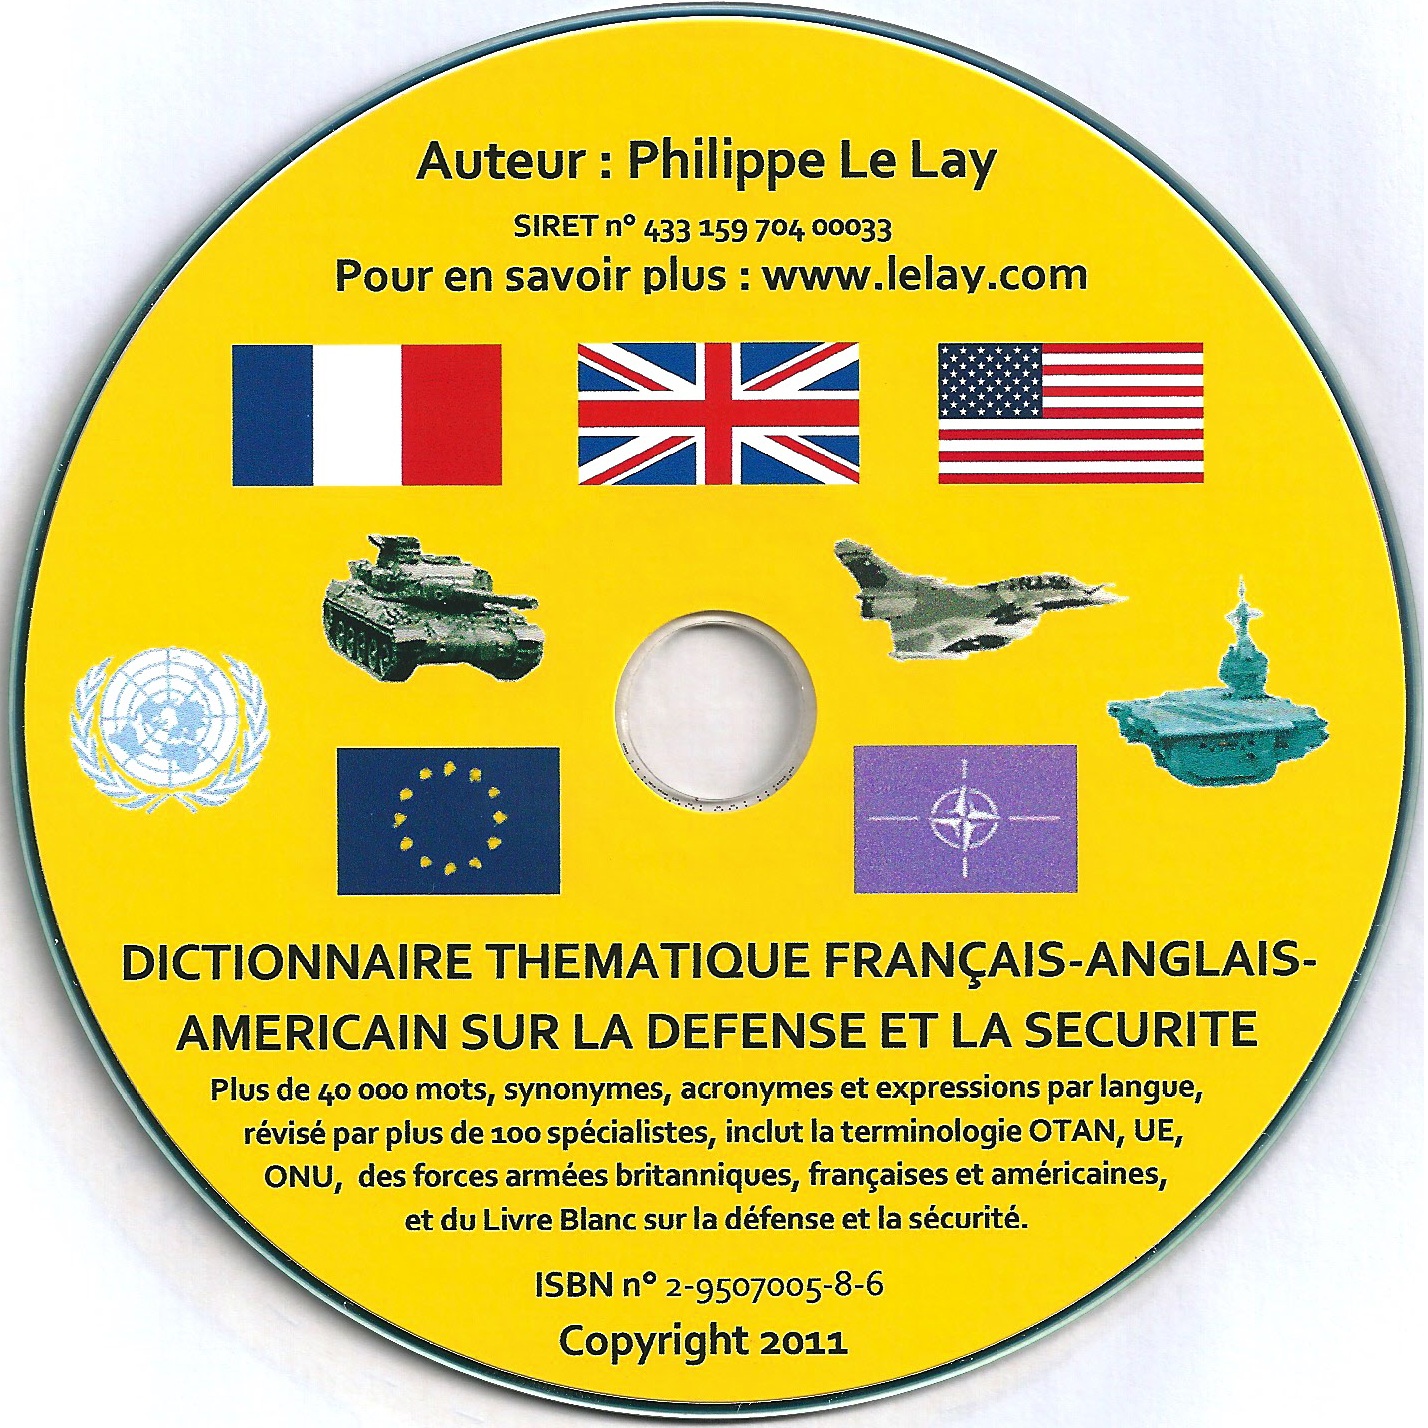 New 2011: Dictionnaire thmatique franais-anglais/amricain sur la dfense et la scurit. French-English/American thematic dictionary on defence and security.